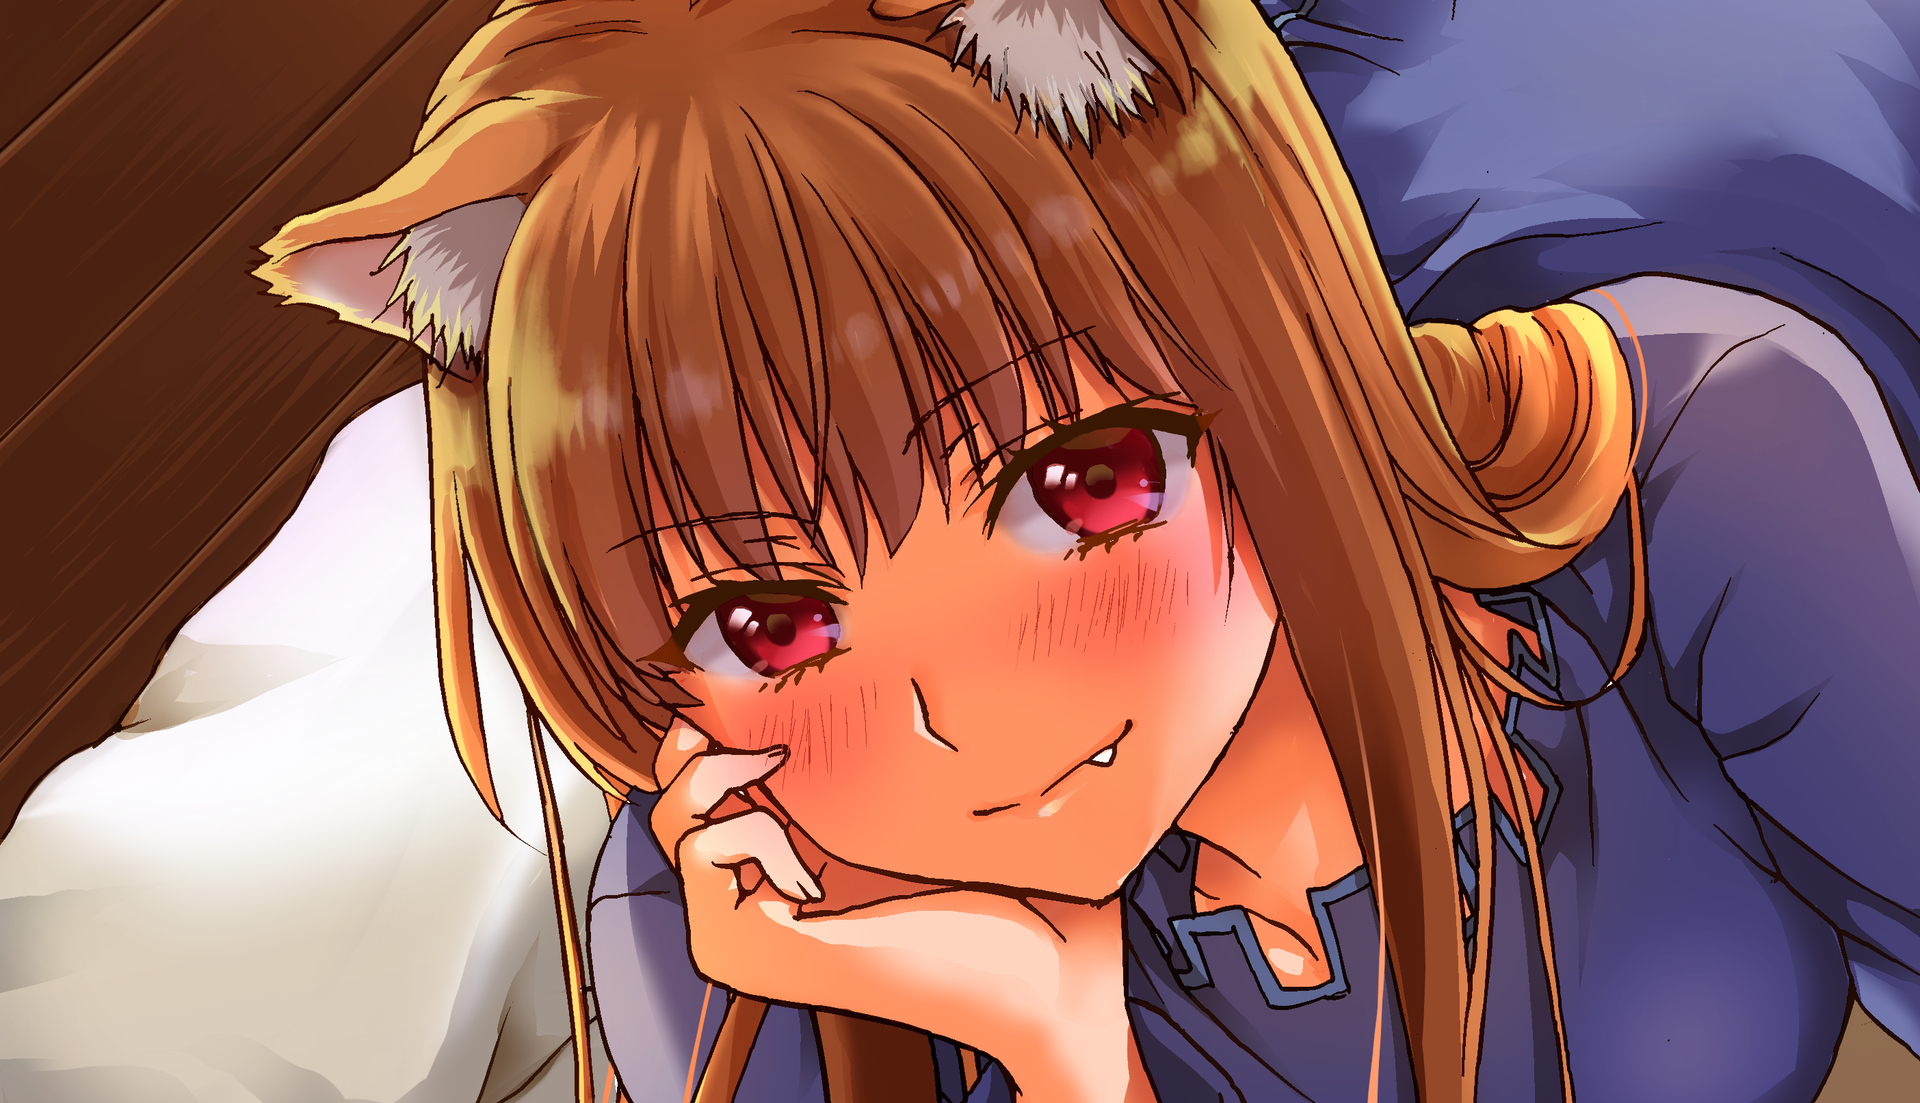 Spice And Wolf Holo Spice And Wolf 1920x1103